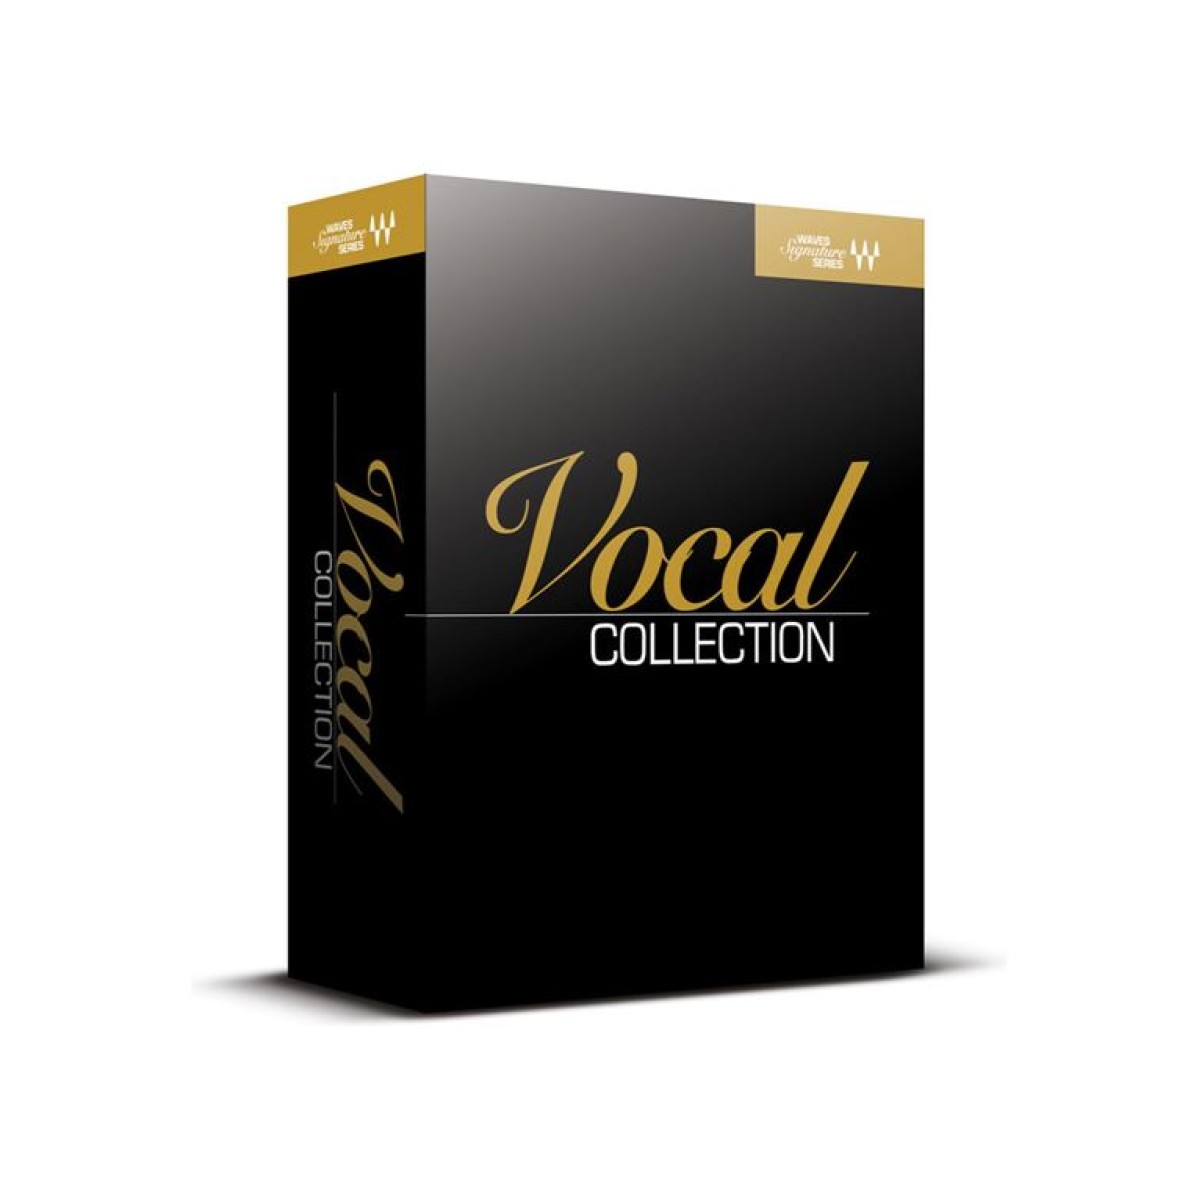 WAVES Signature Series Vocals (License Only)